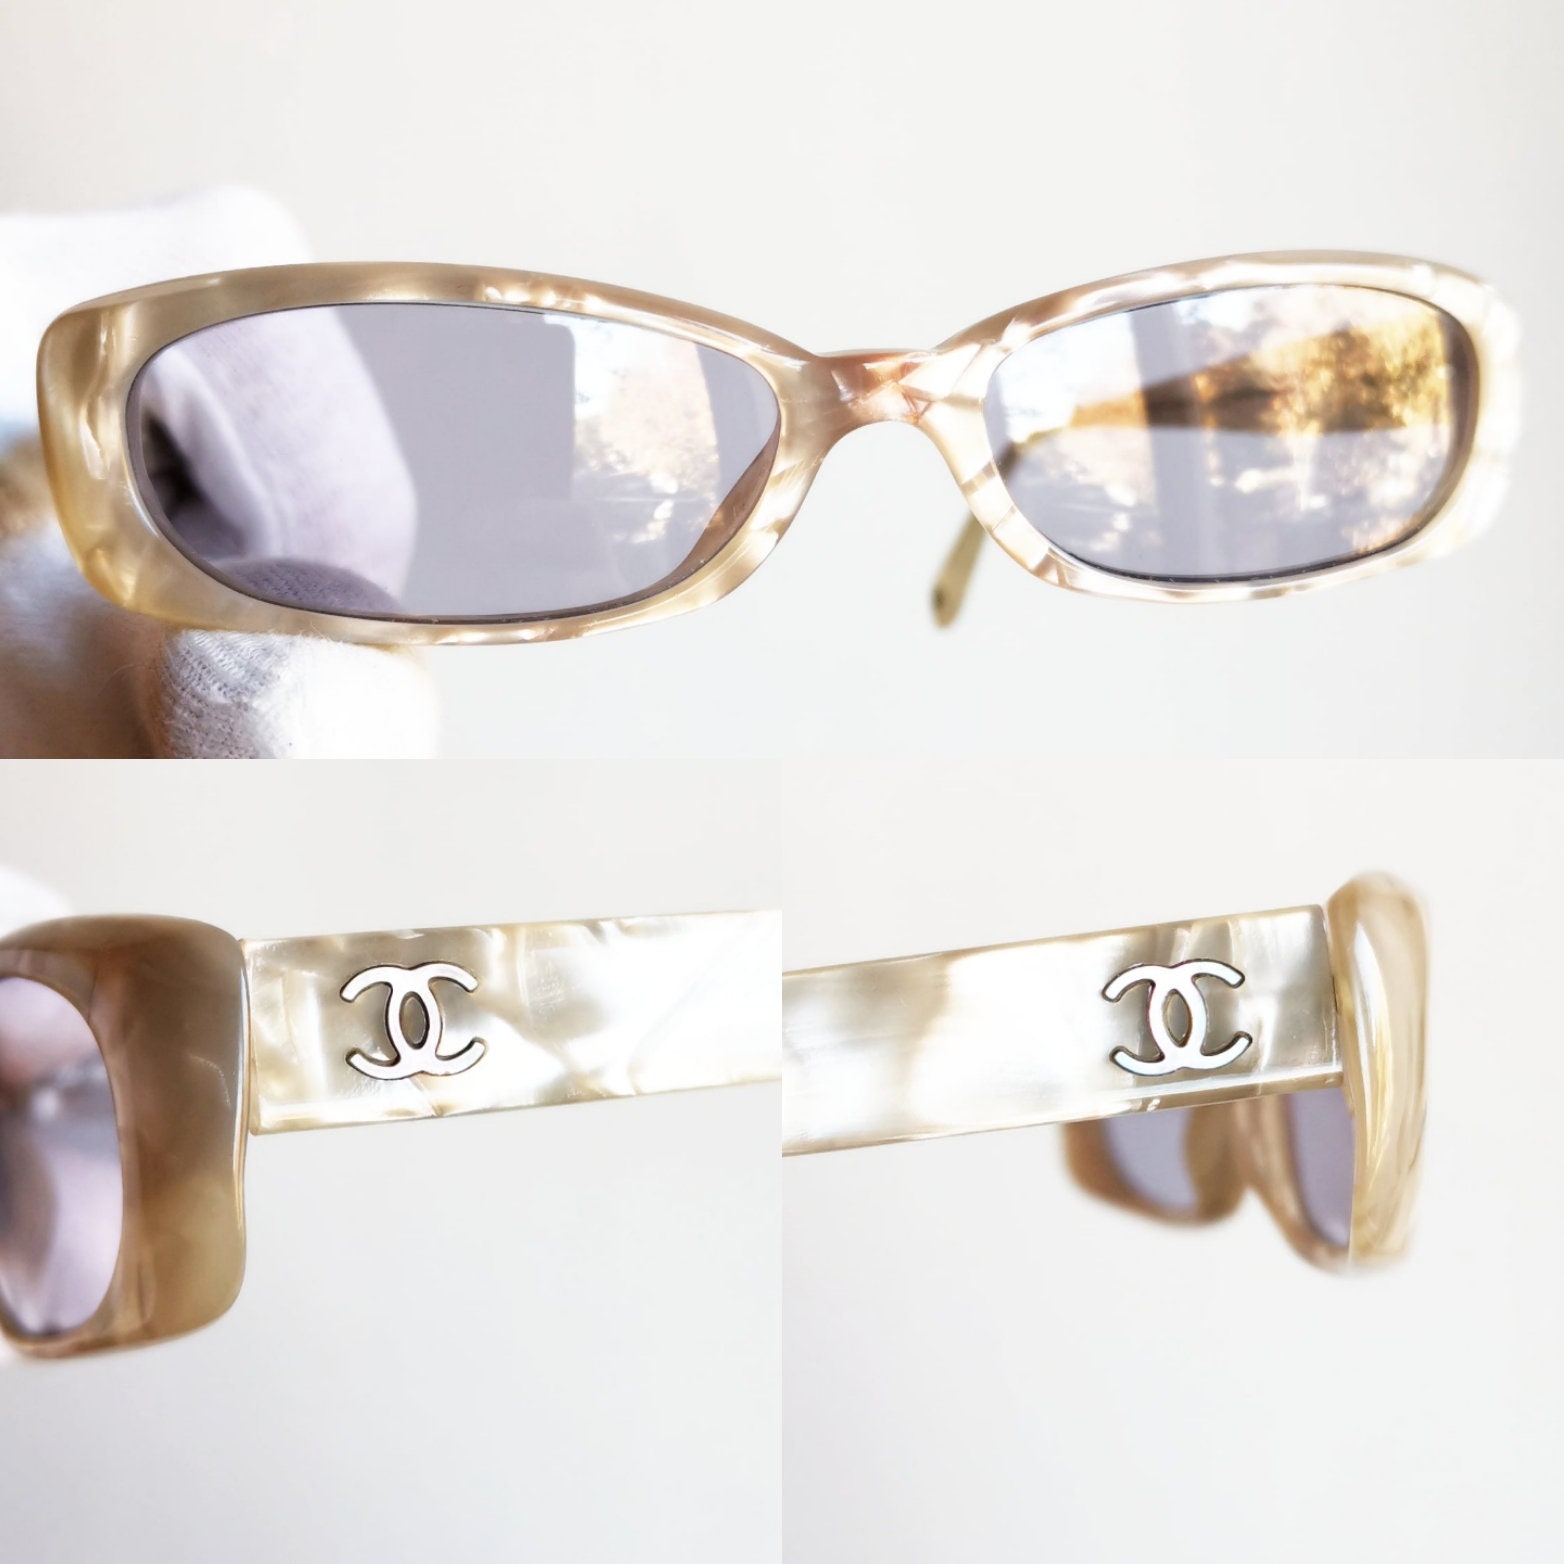 Buy CHANEL Sunglasses Vintage Rare White Powder Pink Mother of Online in  India 